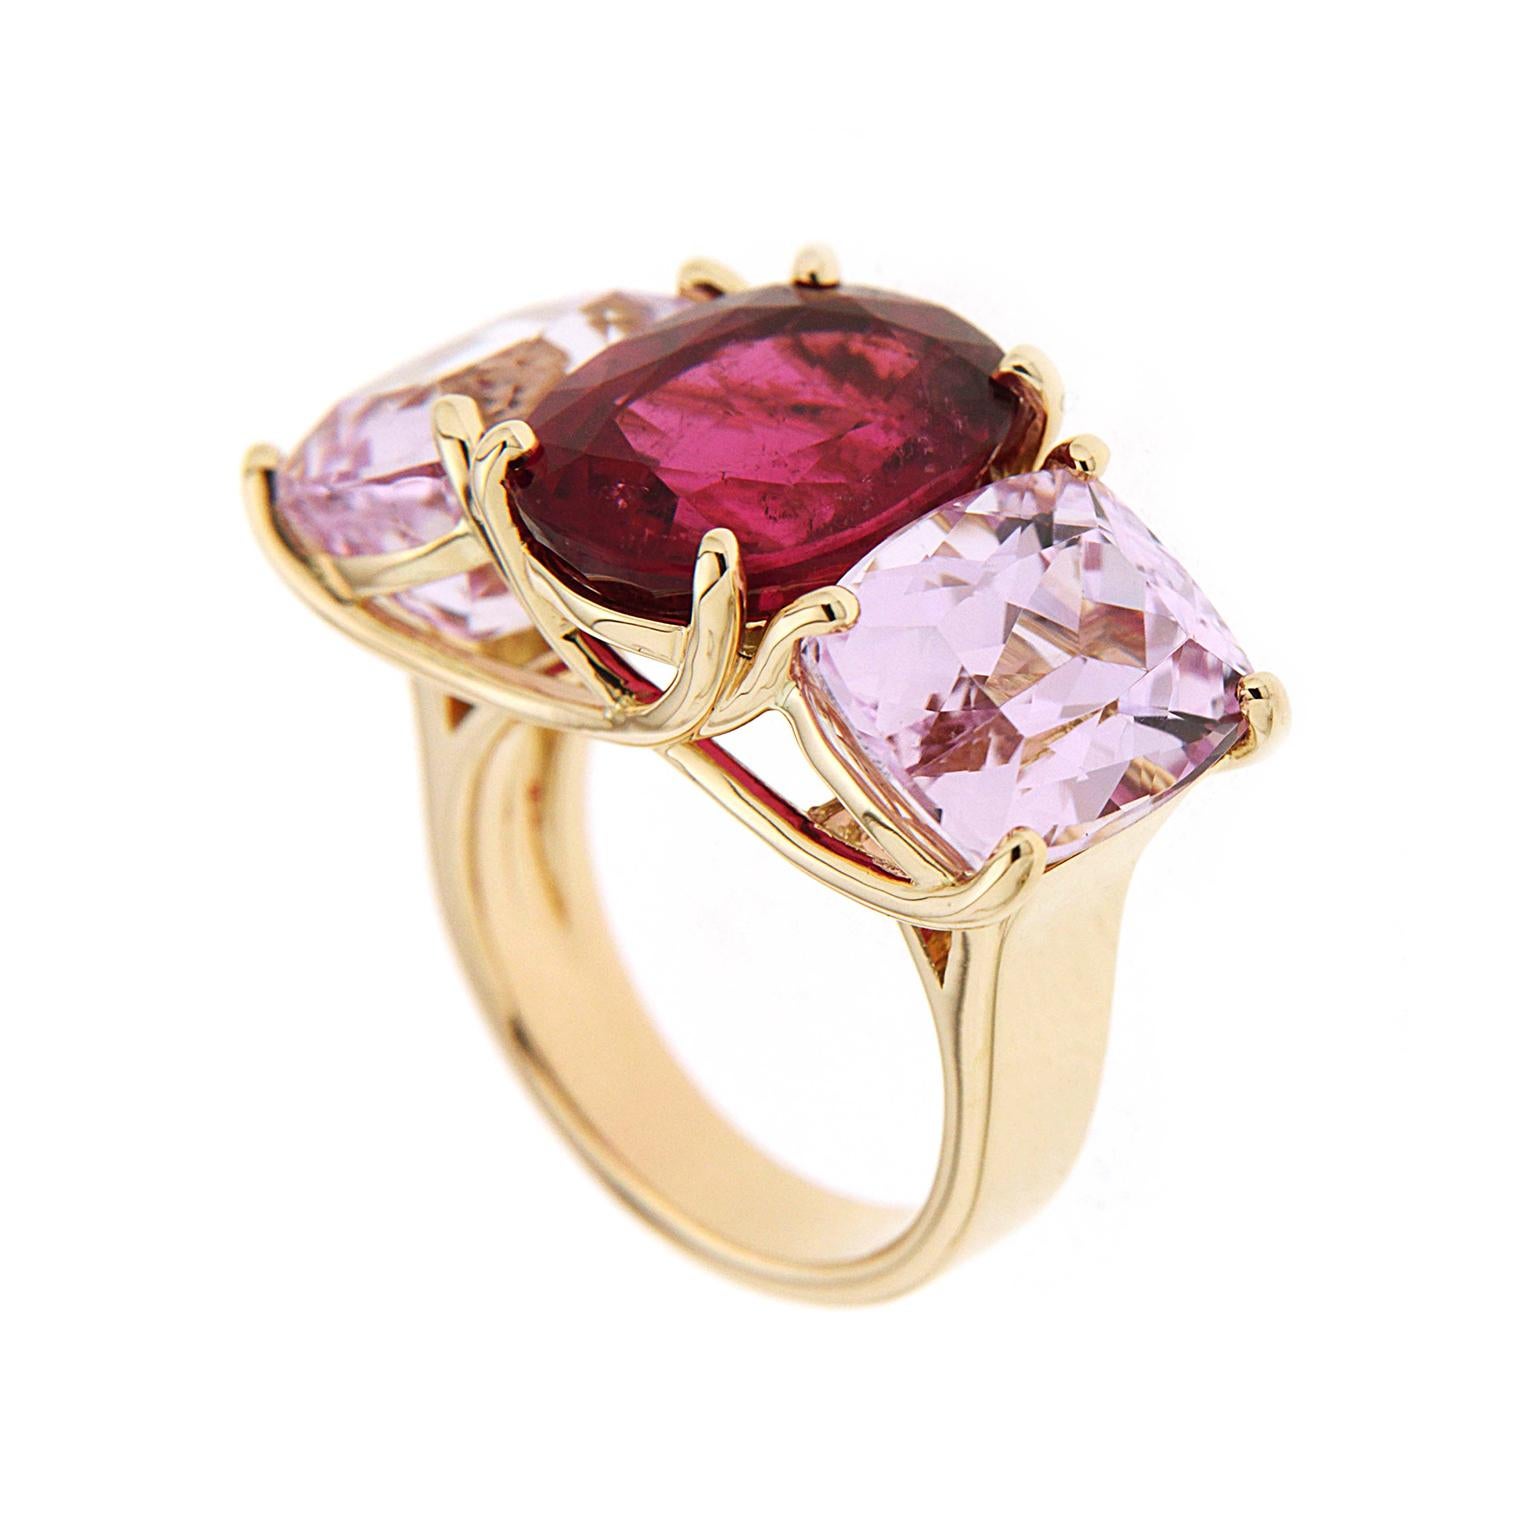 Valentin Magro Oval Rubellite and Kunzite Ring is made of rosy hues. The central jewel is dark rubellite tourmaline shaped into an oval. On either side are cushion shaped kunzites with checkerboard facets. The gemstones rest within 18k yellow gold